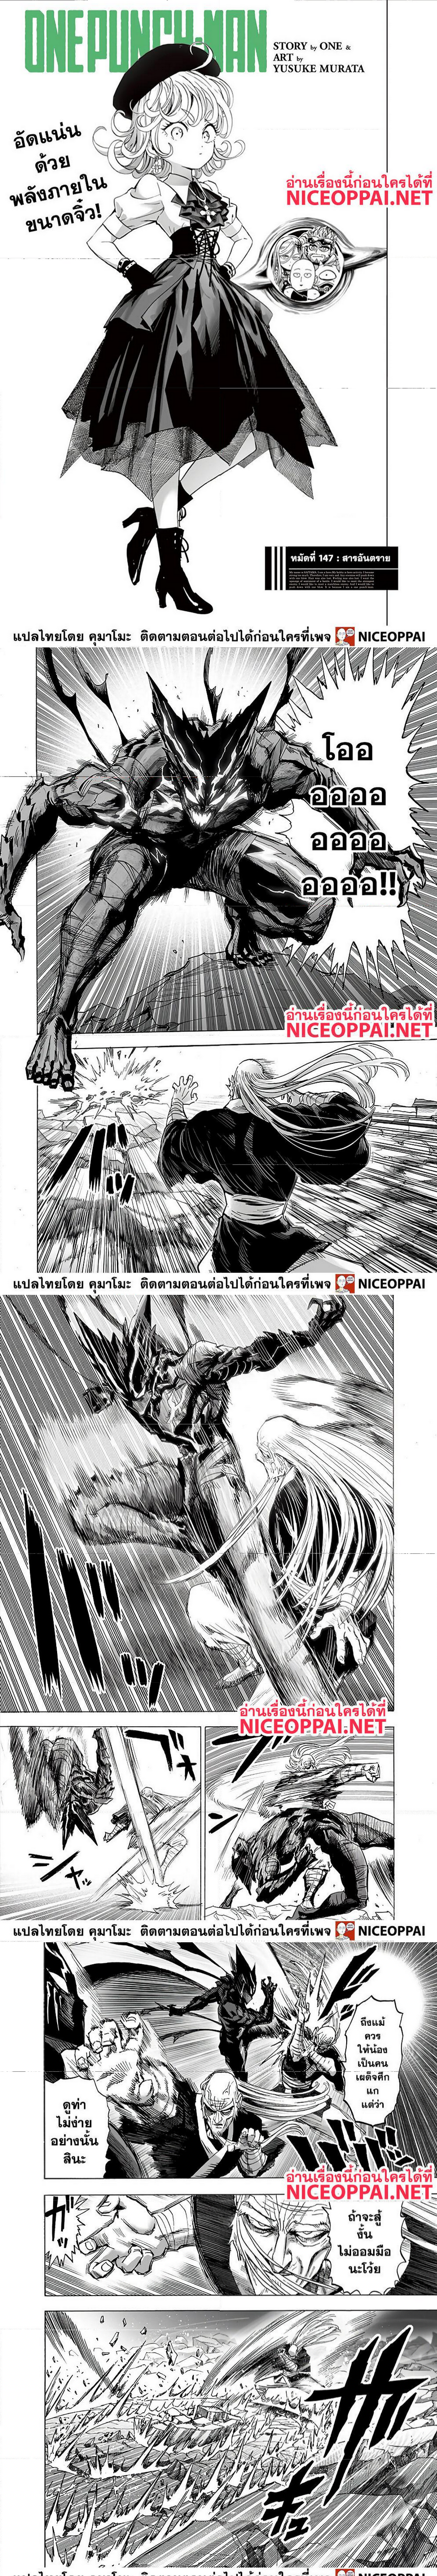 One Punch Man147 (1)